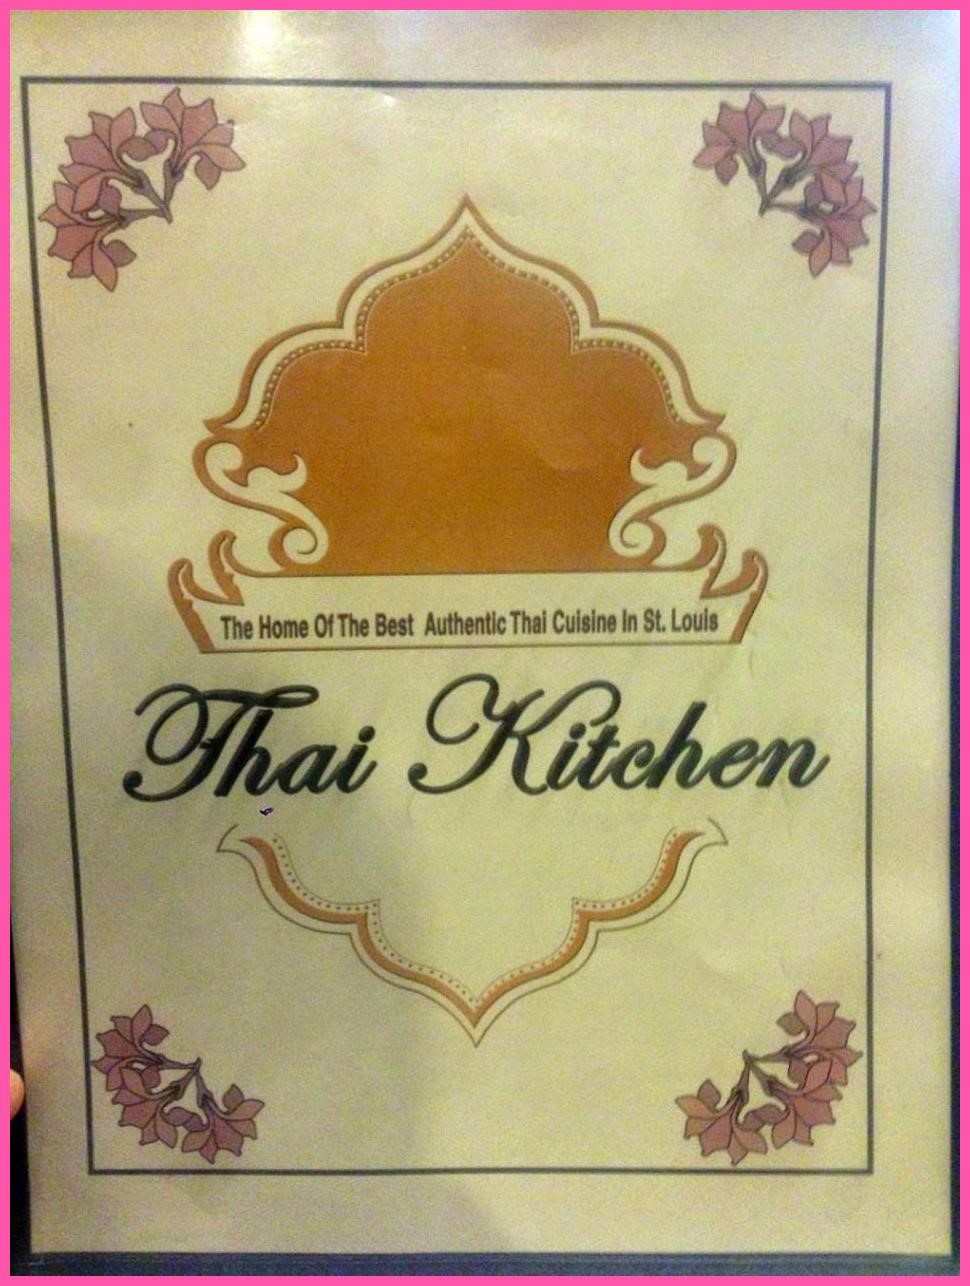 9 Thai Kitchen Maryland Heights Mo Independent Restaurant Review Thai Kitchen Thai,Kitchen,Maryland,Heights